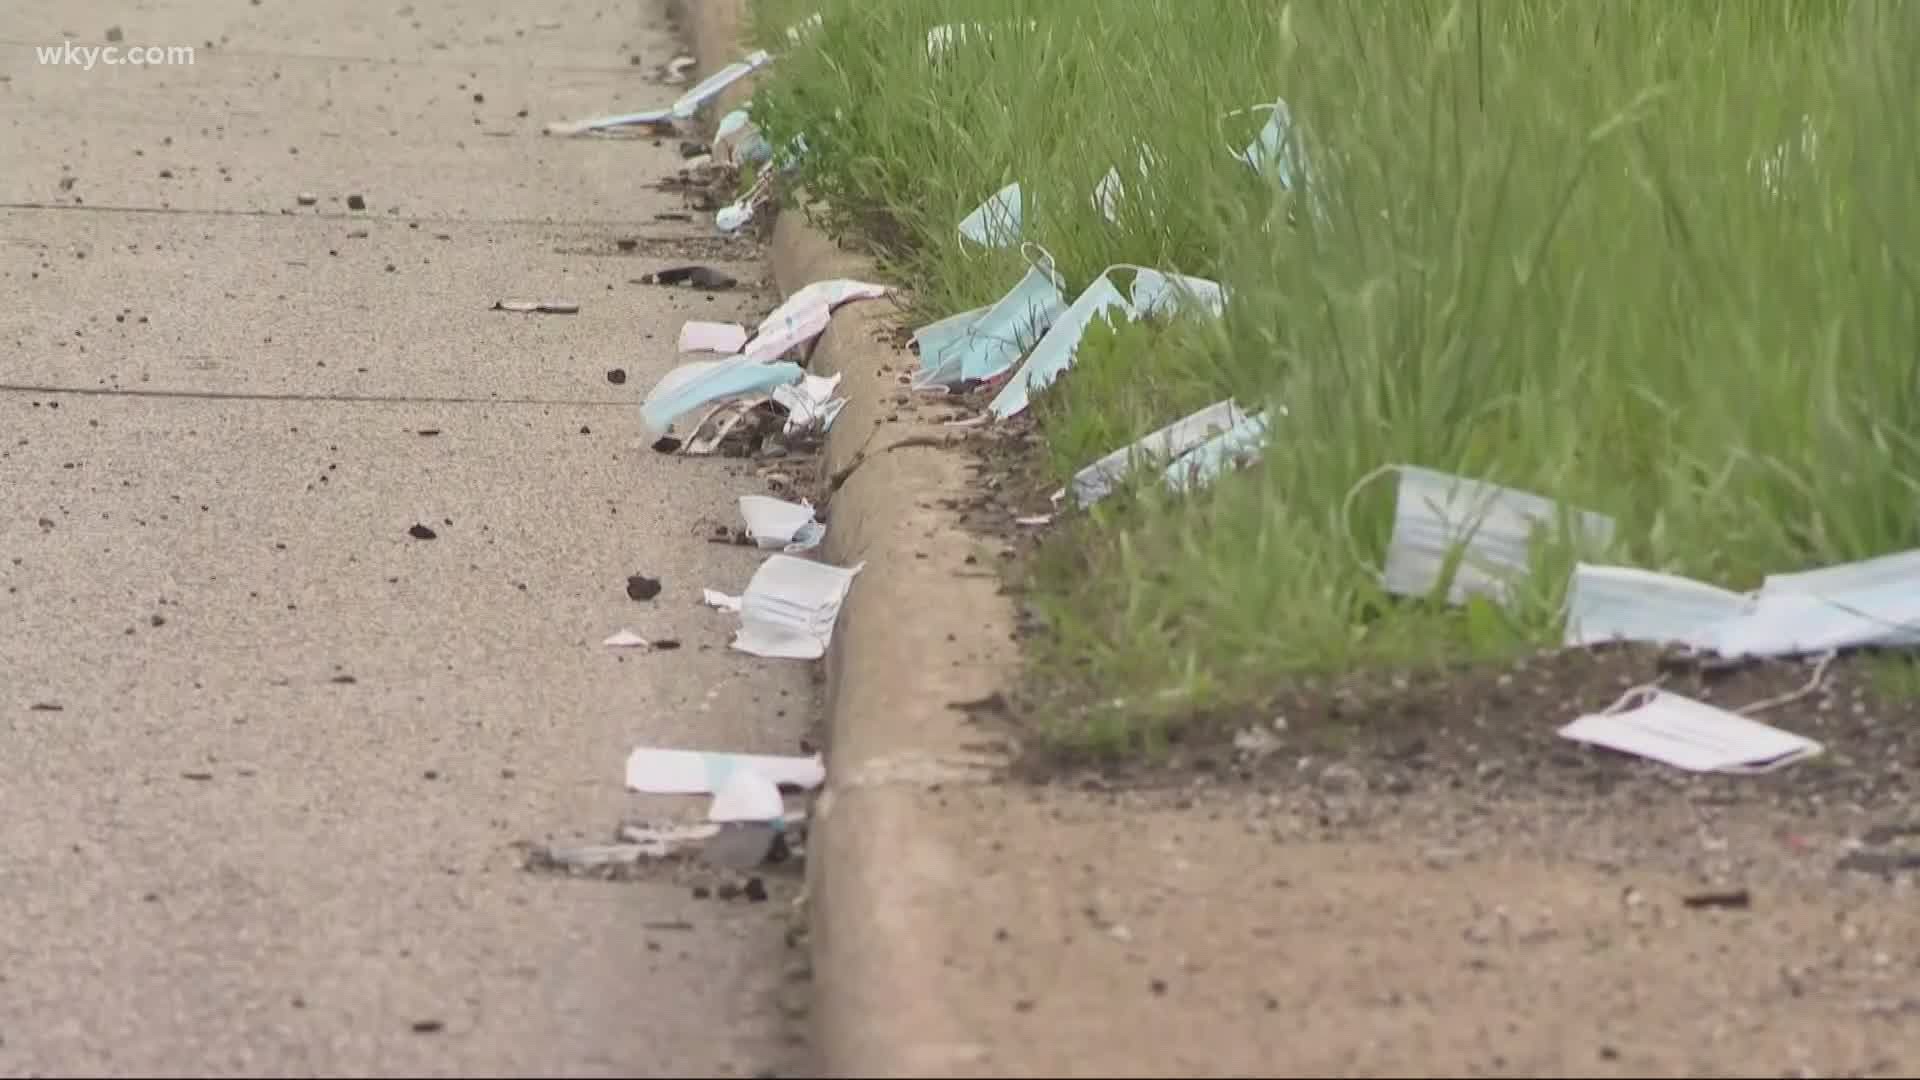 ODOT workers say it's a two-day job for them to clean up the litter. 'Would you rather us fill potholes or pick up trash?' an ODOT public information officer said.